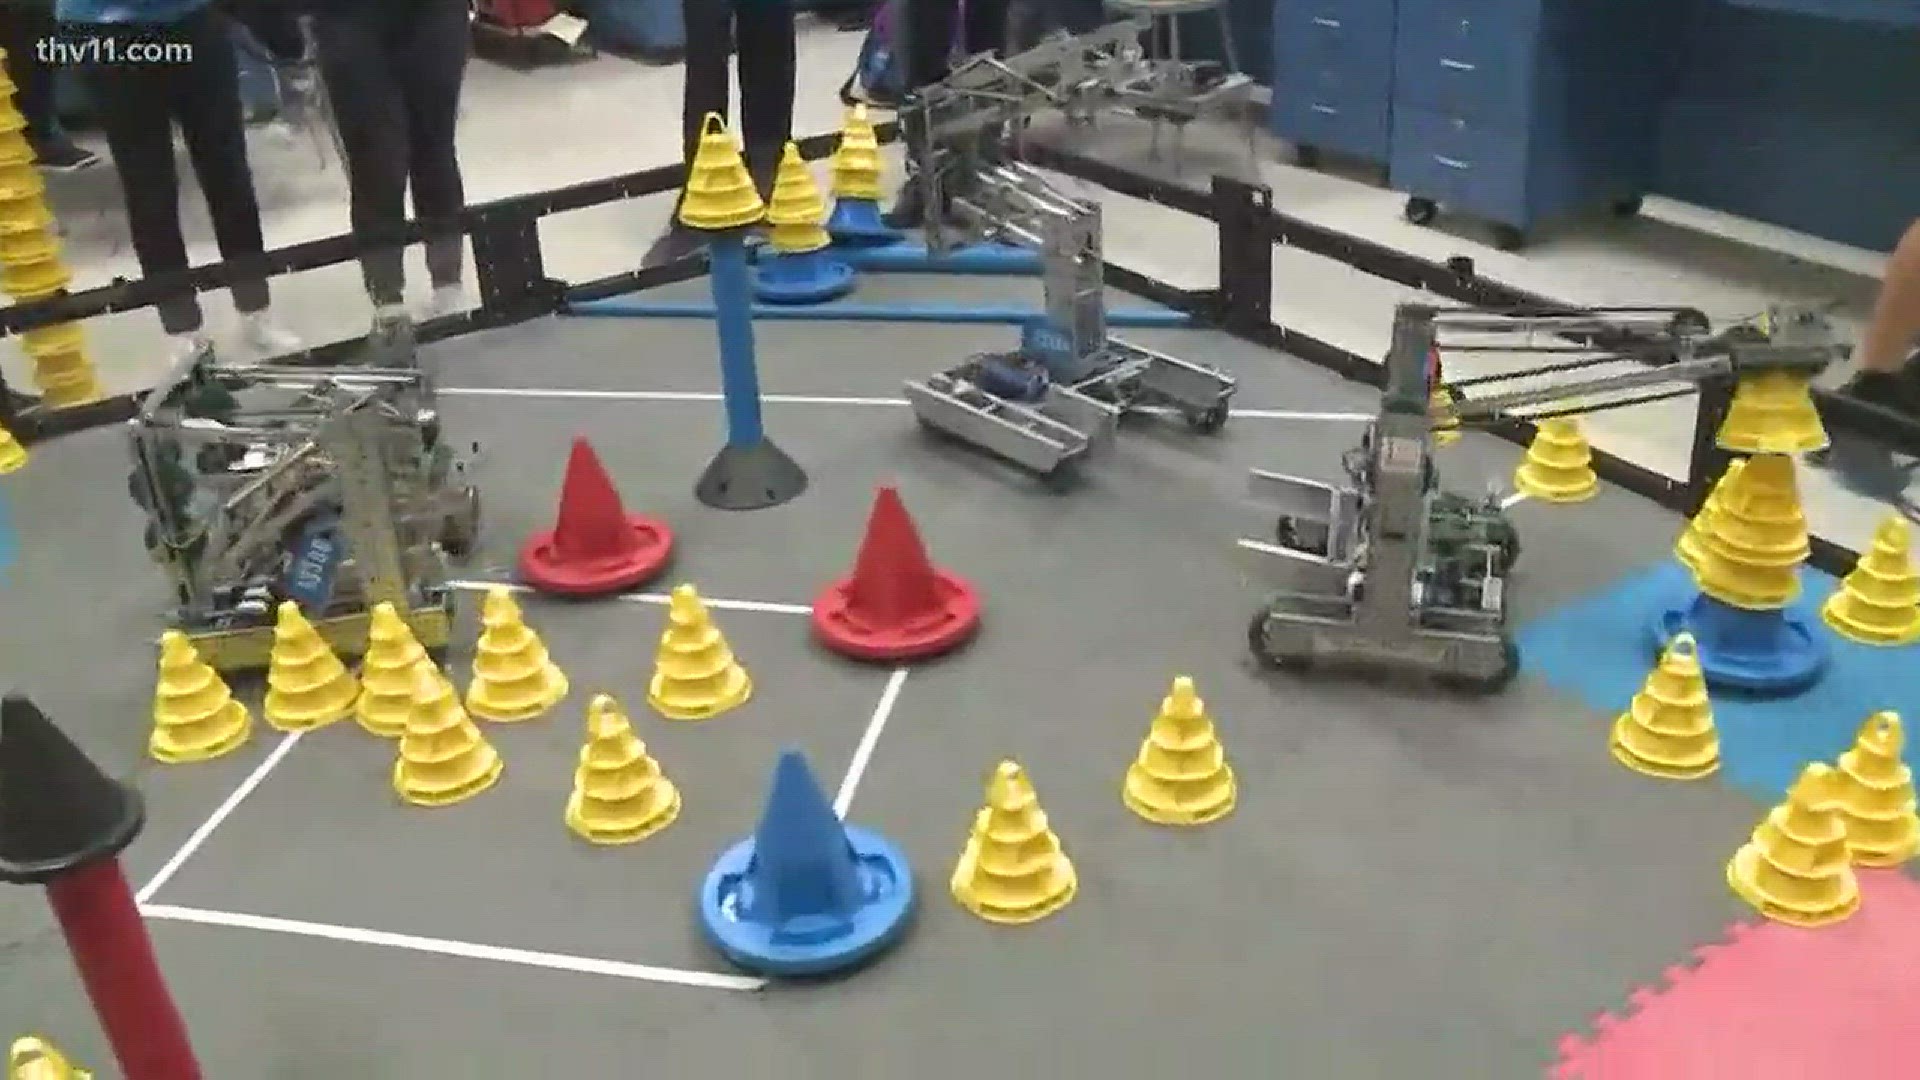 Students at Bryant Middle School are bringing the heat this weekend with their own handcrafted robots. THV11's Amanda Jaeger was live at Bryant on Wednesday morning to show us what's at stake!